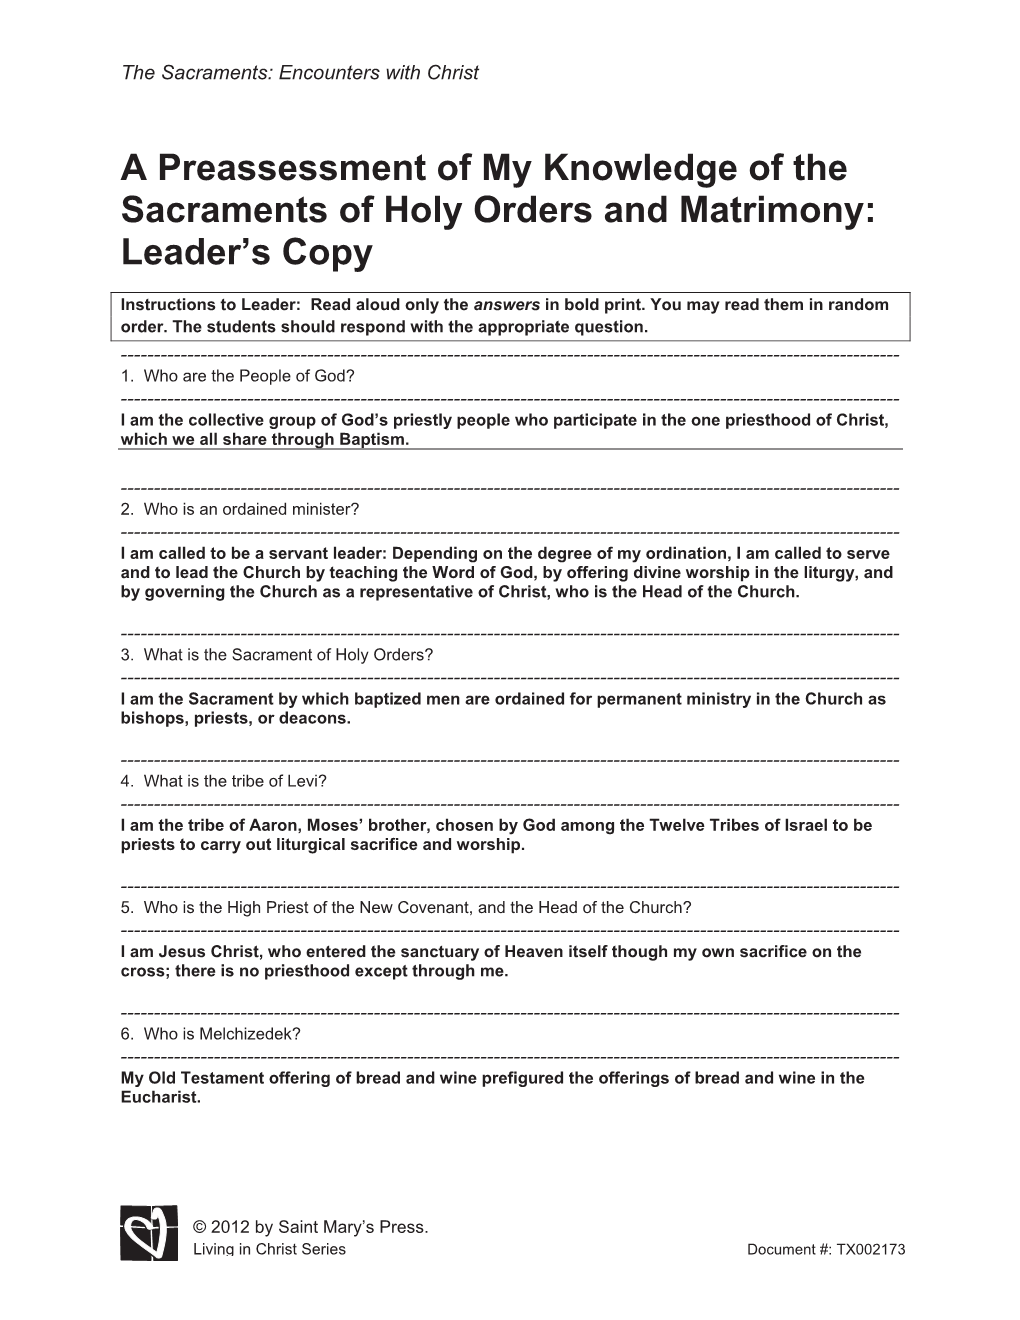 A Preassessment of My Knowledge of the Sacraments of Holy Orders and Matrimony: Leader’S Copy